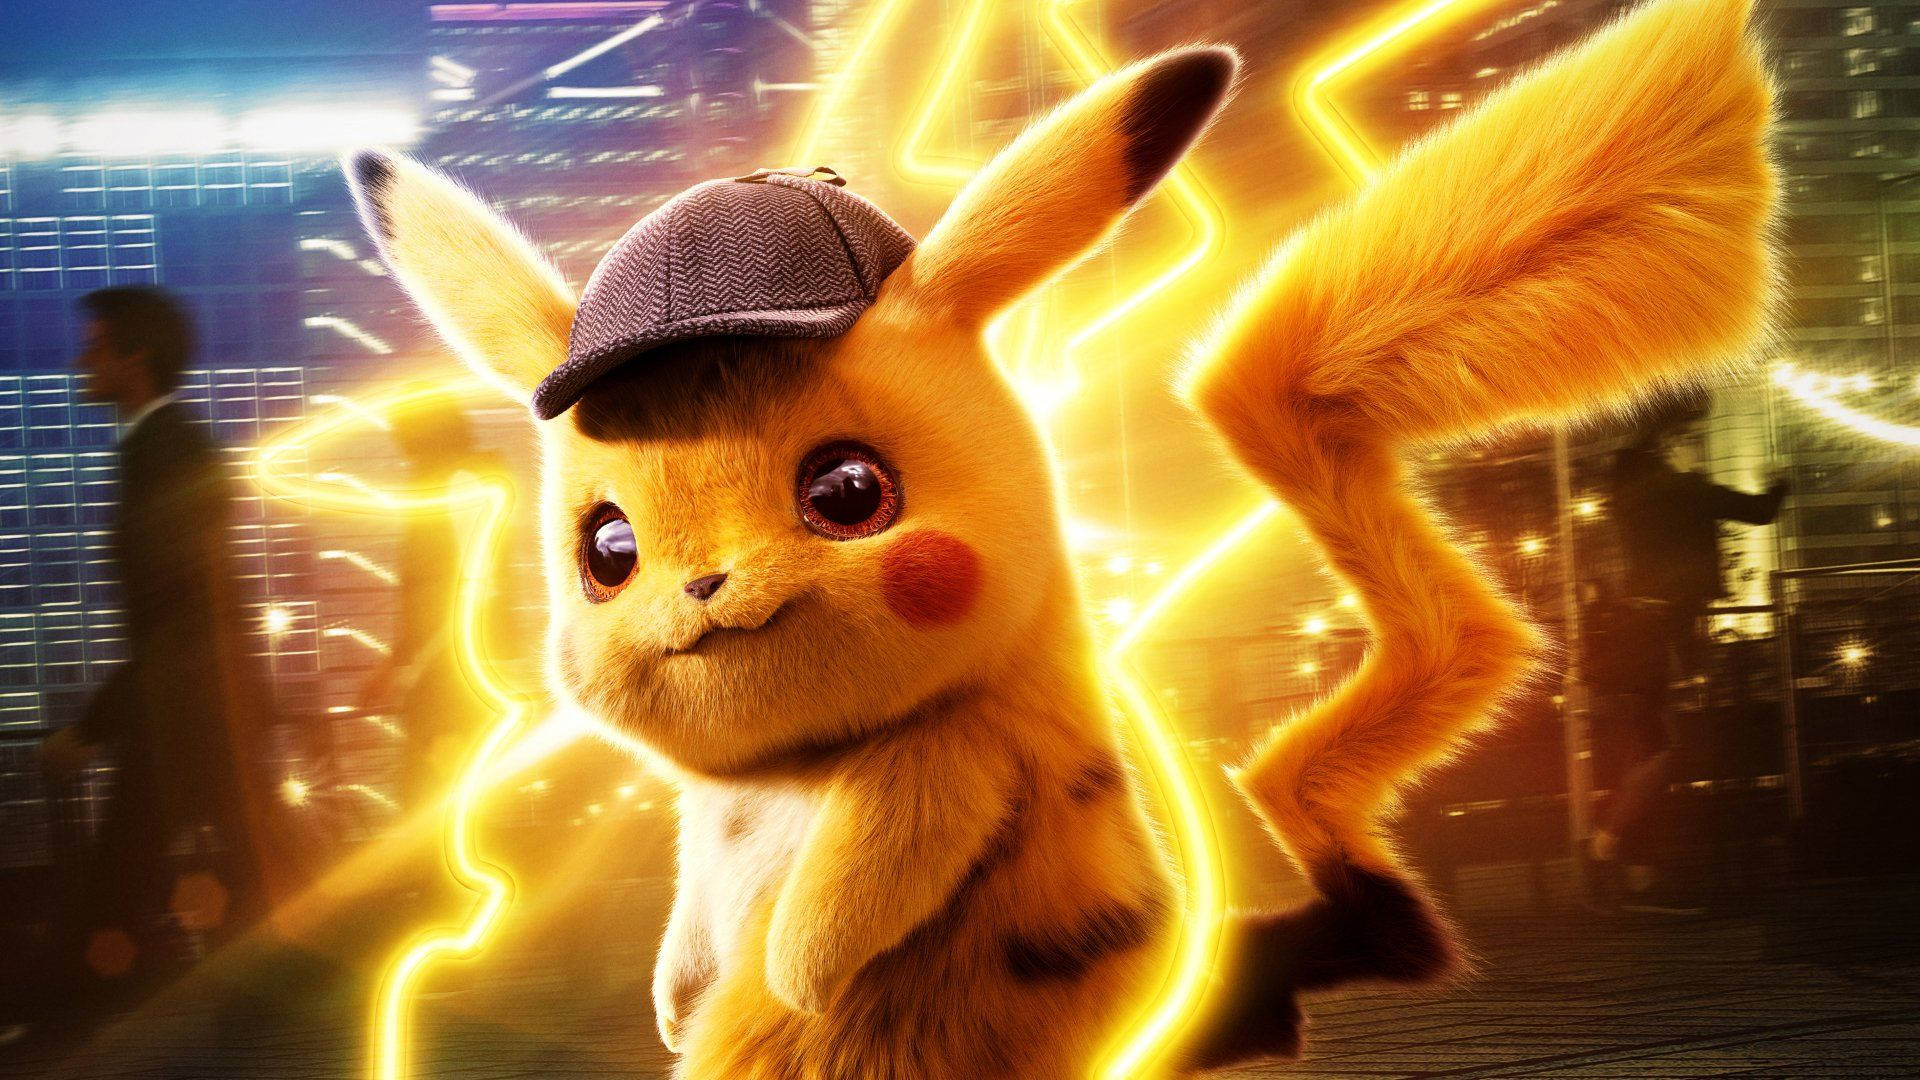 Pikachu 3d Sparkling With Electricity Wallpaper